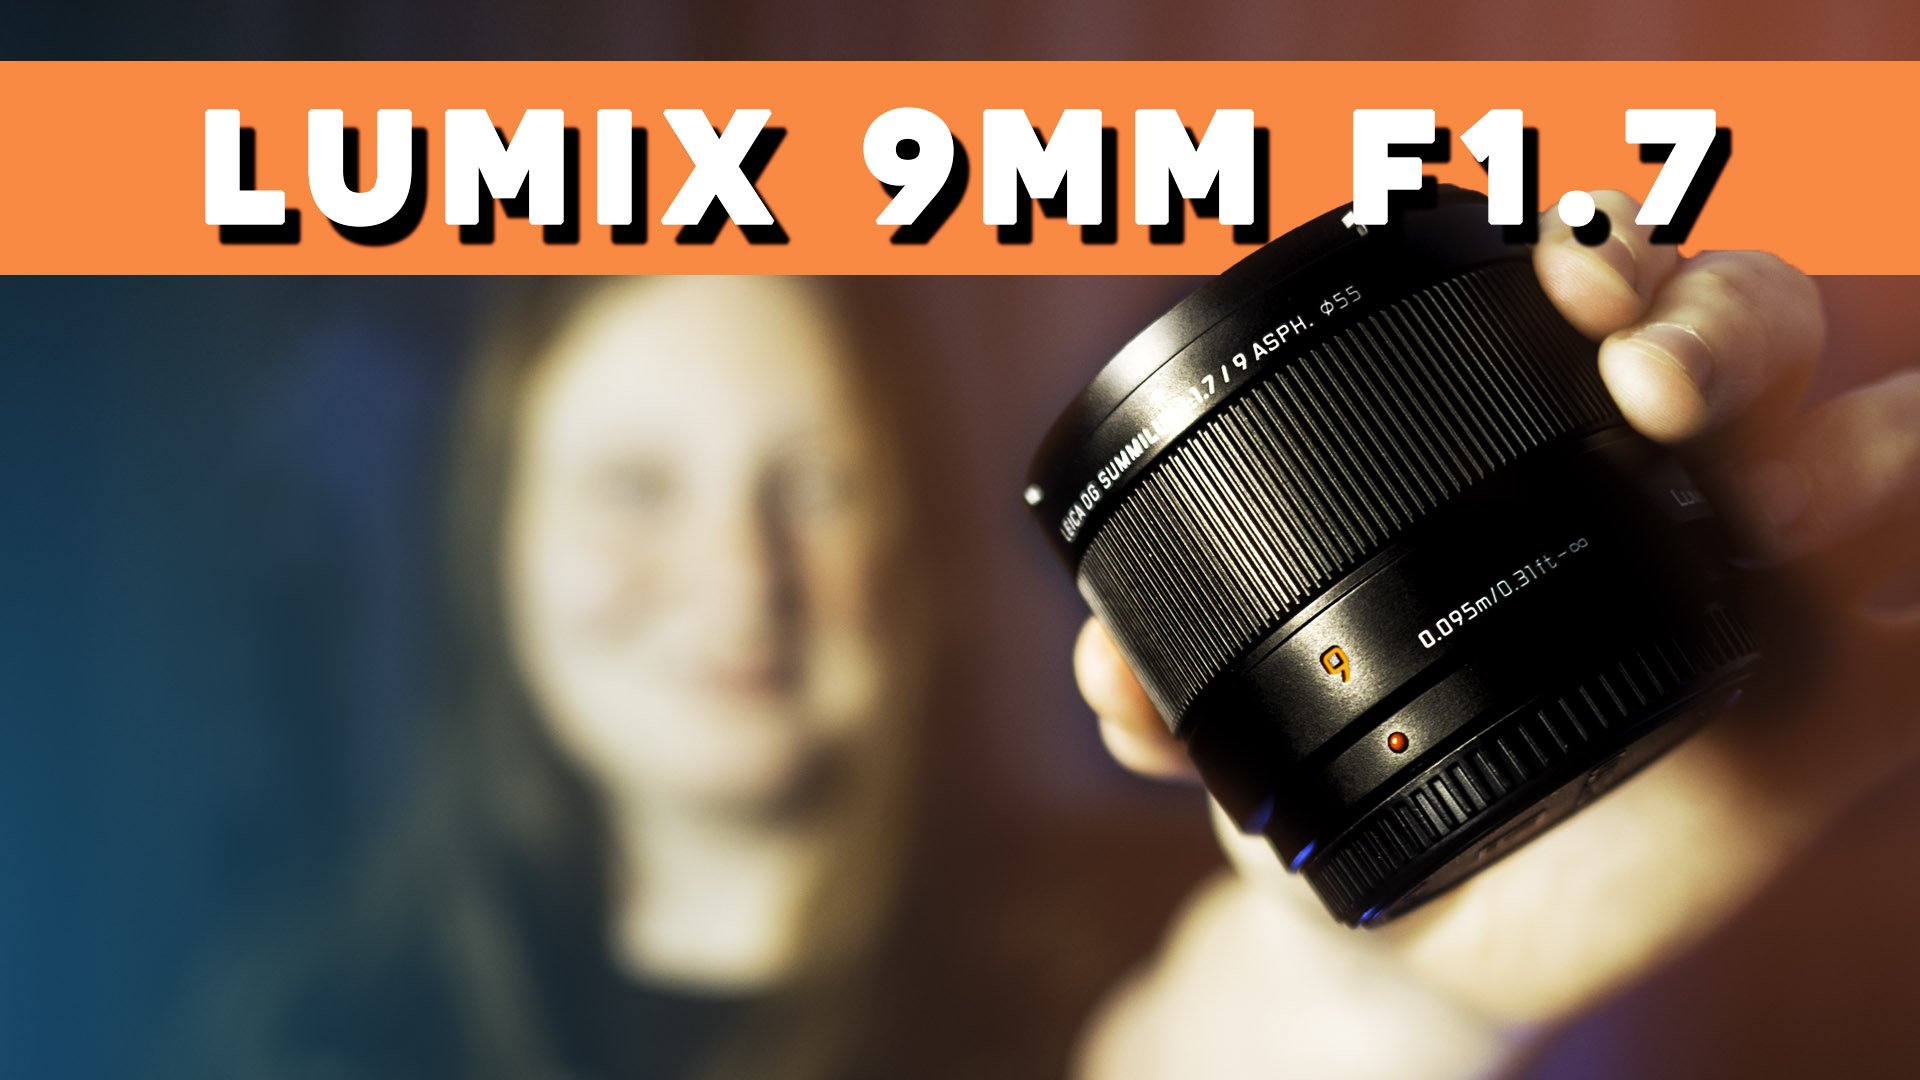 lumix leica summilux 9mm f1.7 full review! // new micro four thirds 